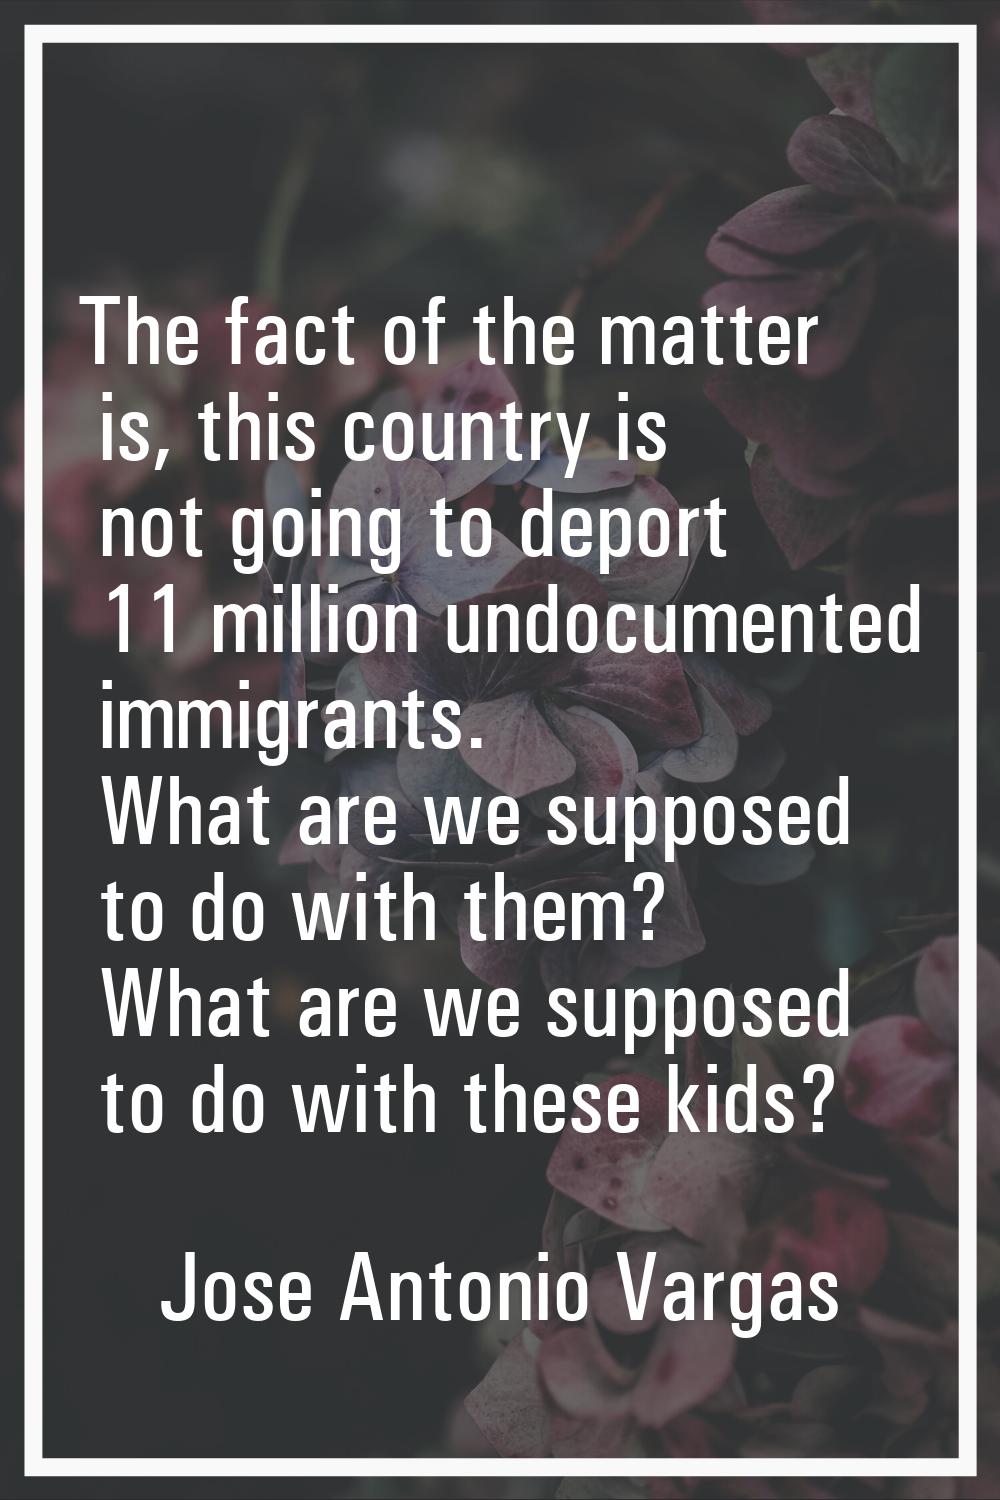 The fact of the matter is, this country is not going to deport 11 million undocumented immigrants. 